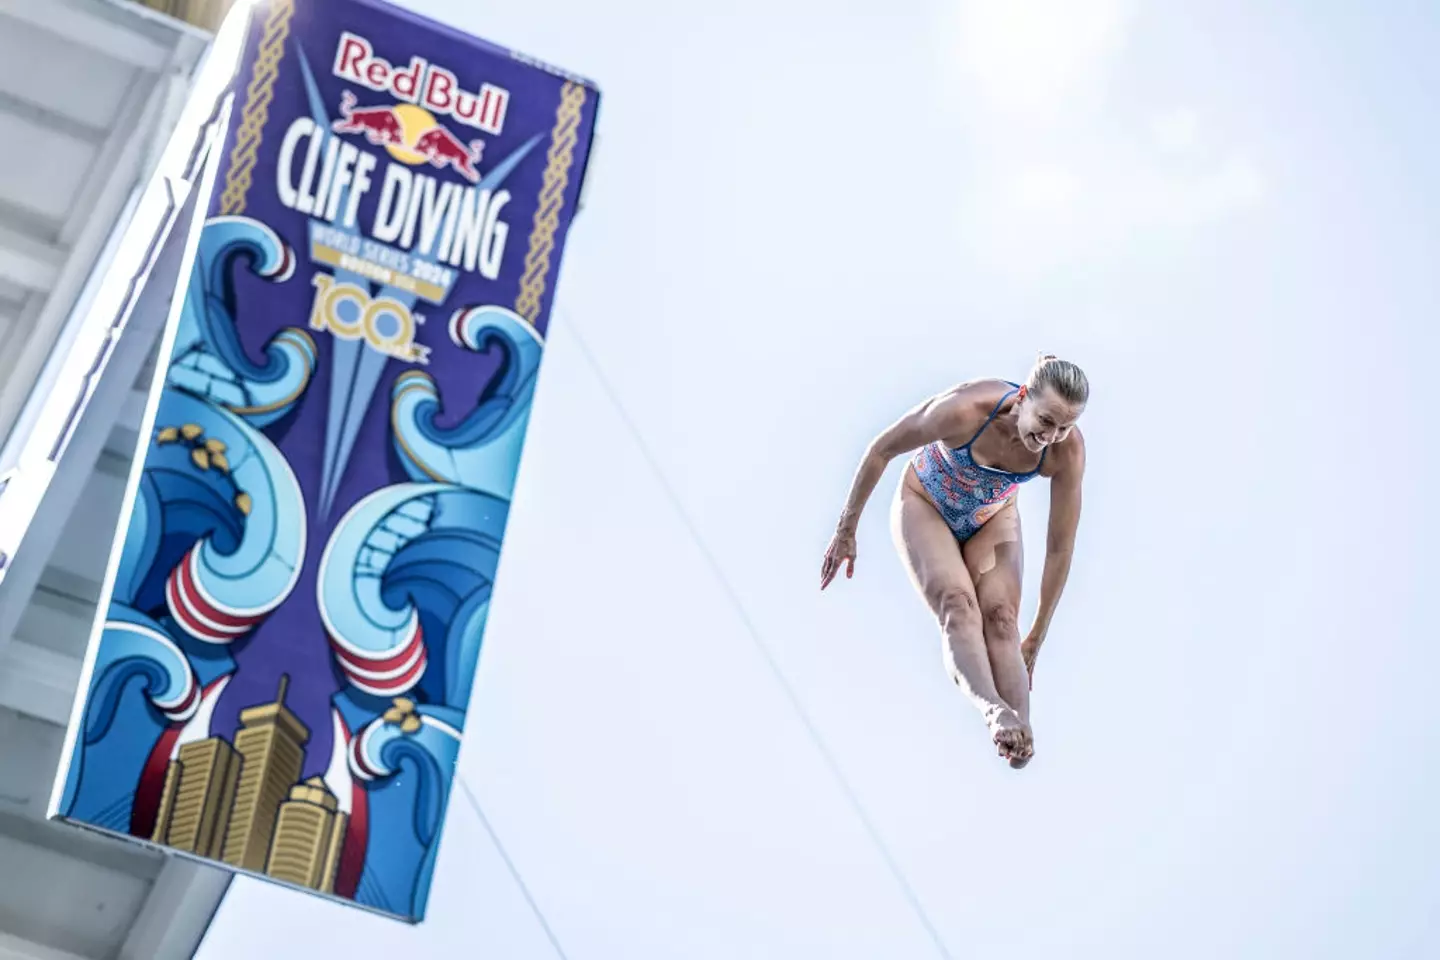 Rhiannon Iffland has won seven consecutive Red Bull Cliff Diving World Series championships (Image: Getty)